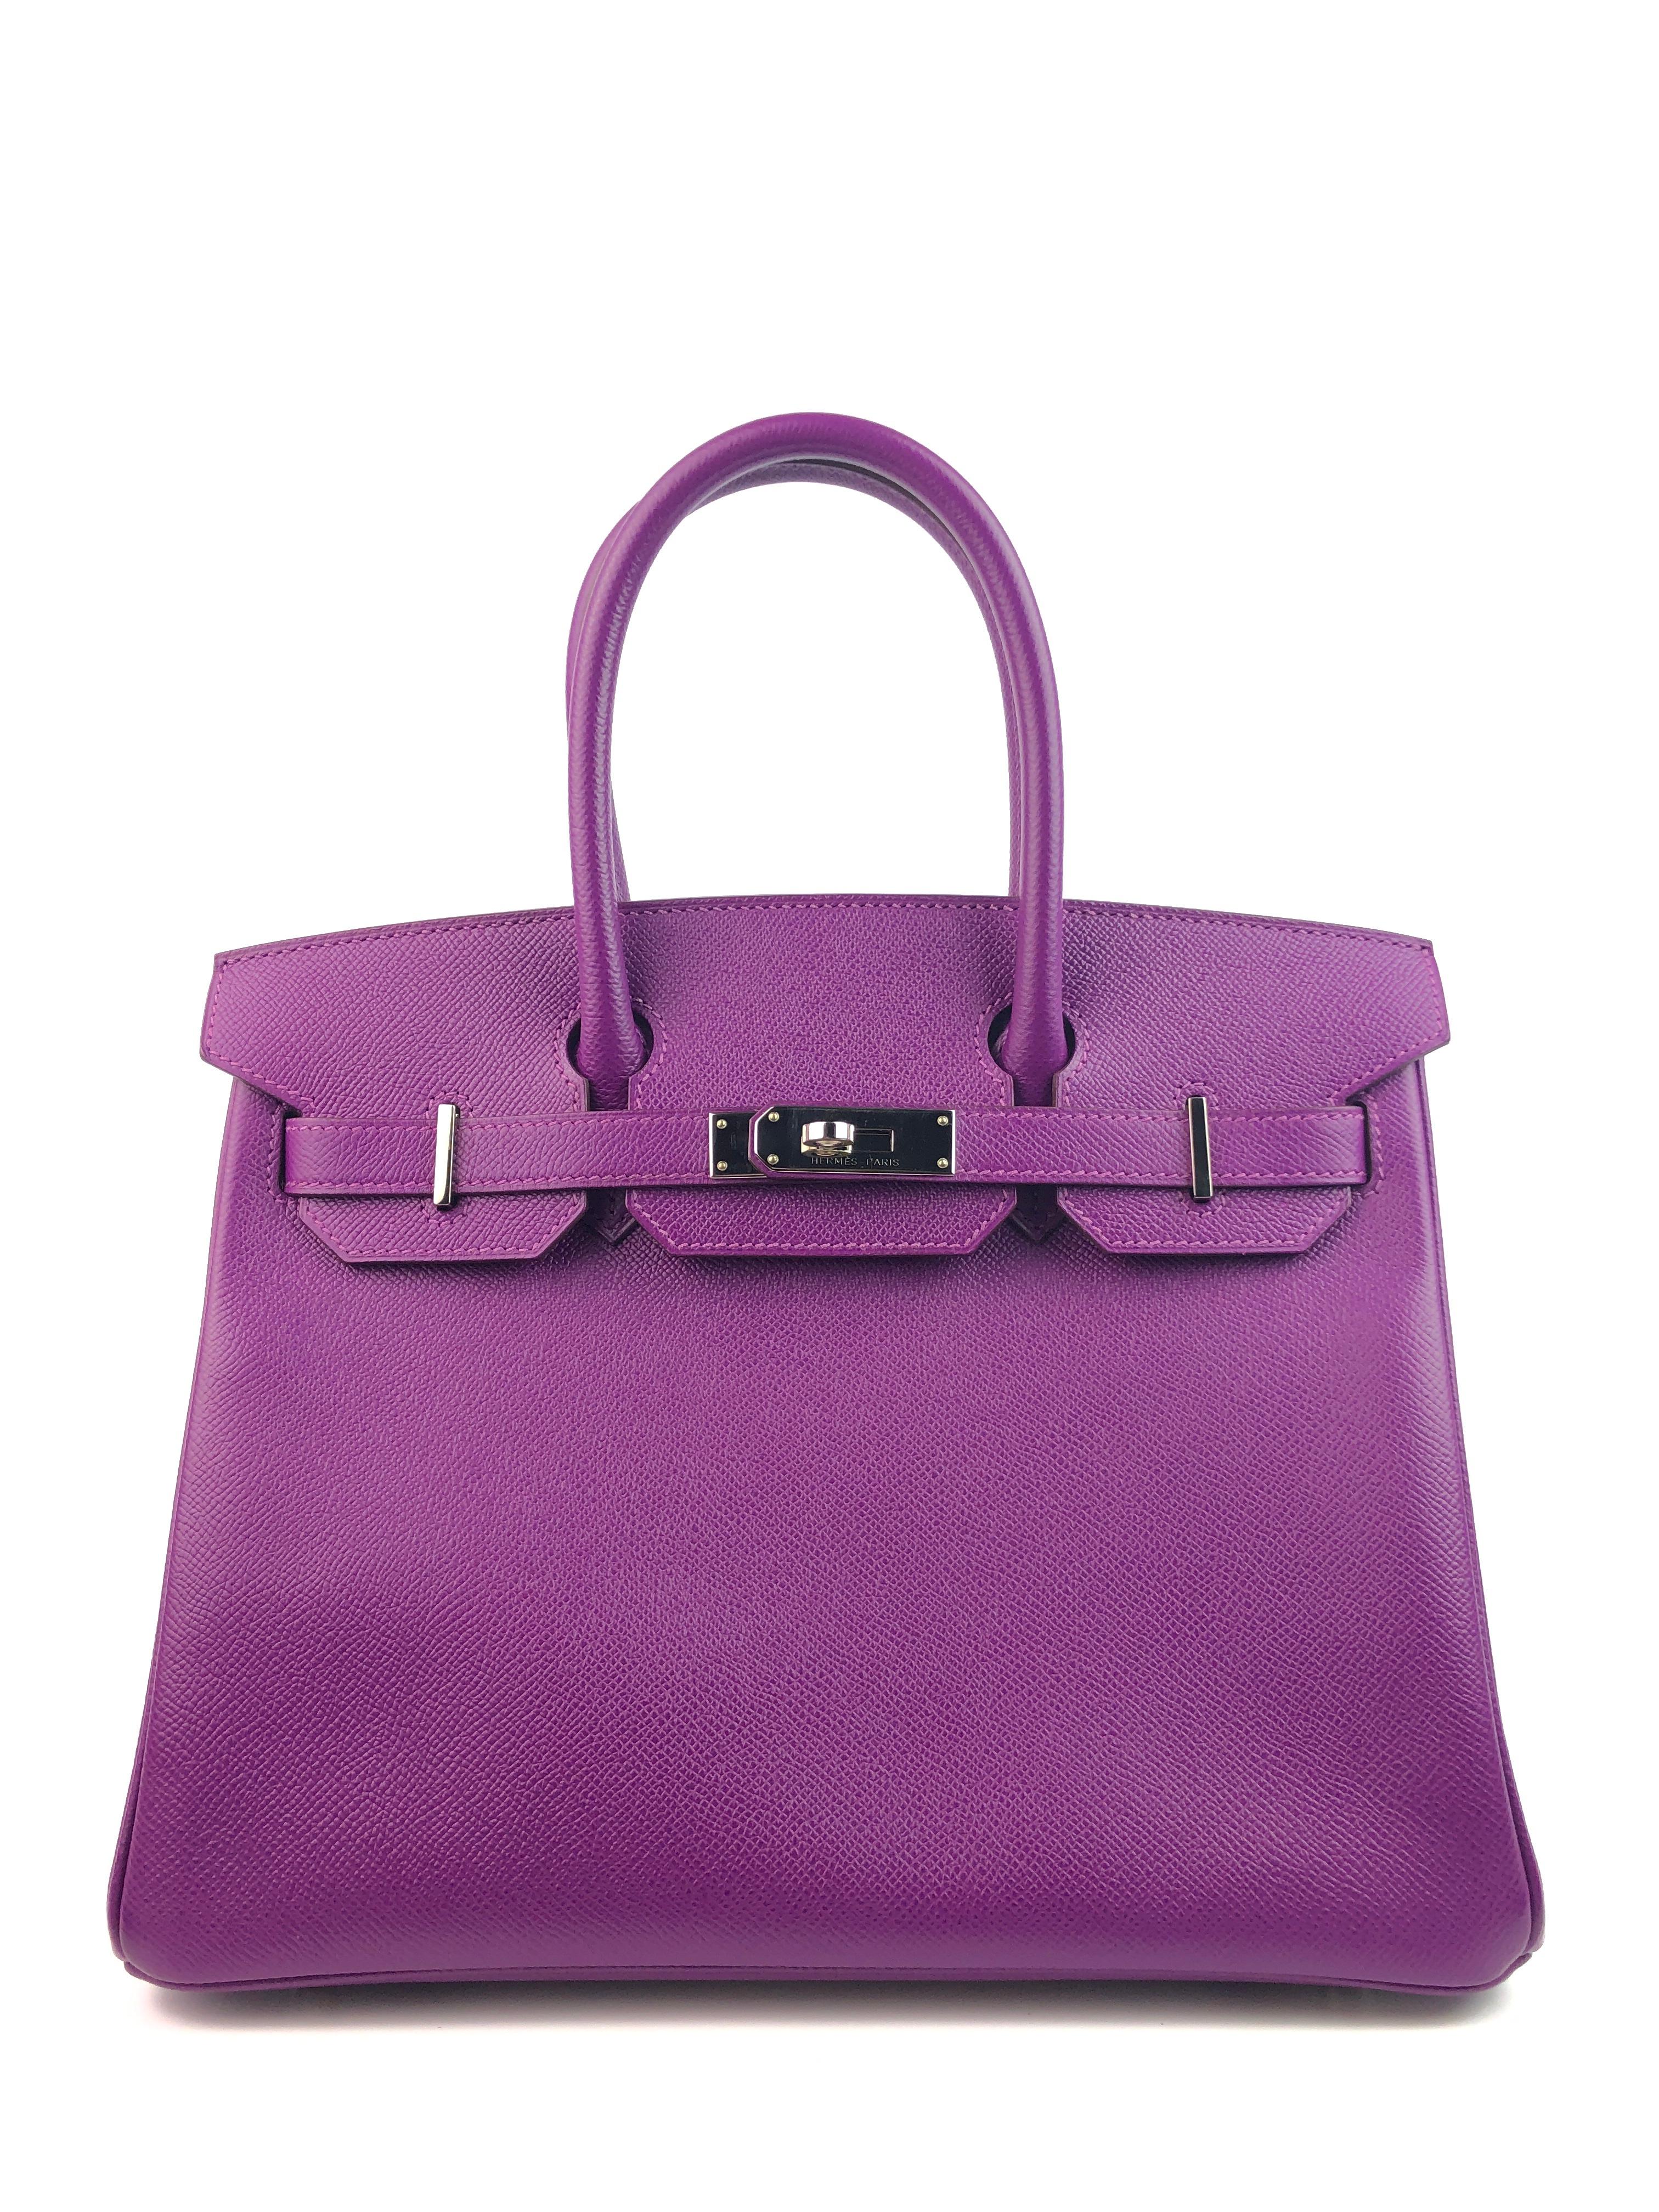 RARE Hermes Birkin 30 Anemone Purple Epsom Palladium Hardware.  Excellent Condition, Light Hairlines on Hardware, Excellent corners and Structure. R Stamp 2014.

Shop with Confidence from Lux Addicts. Authenticity Guaranteed!